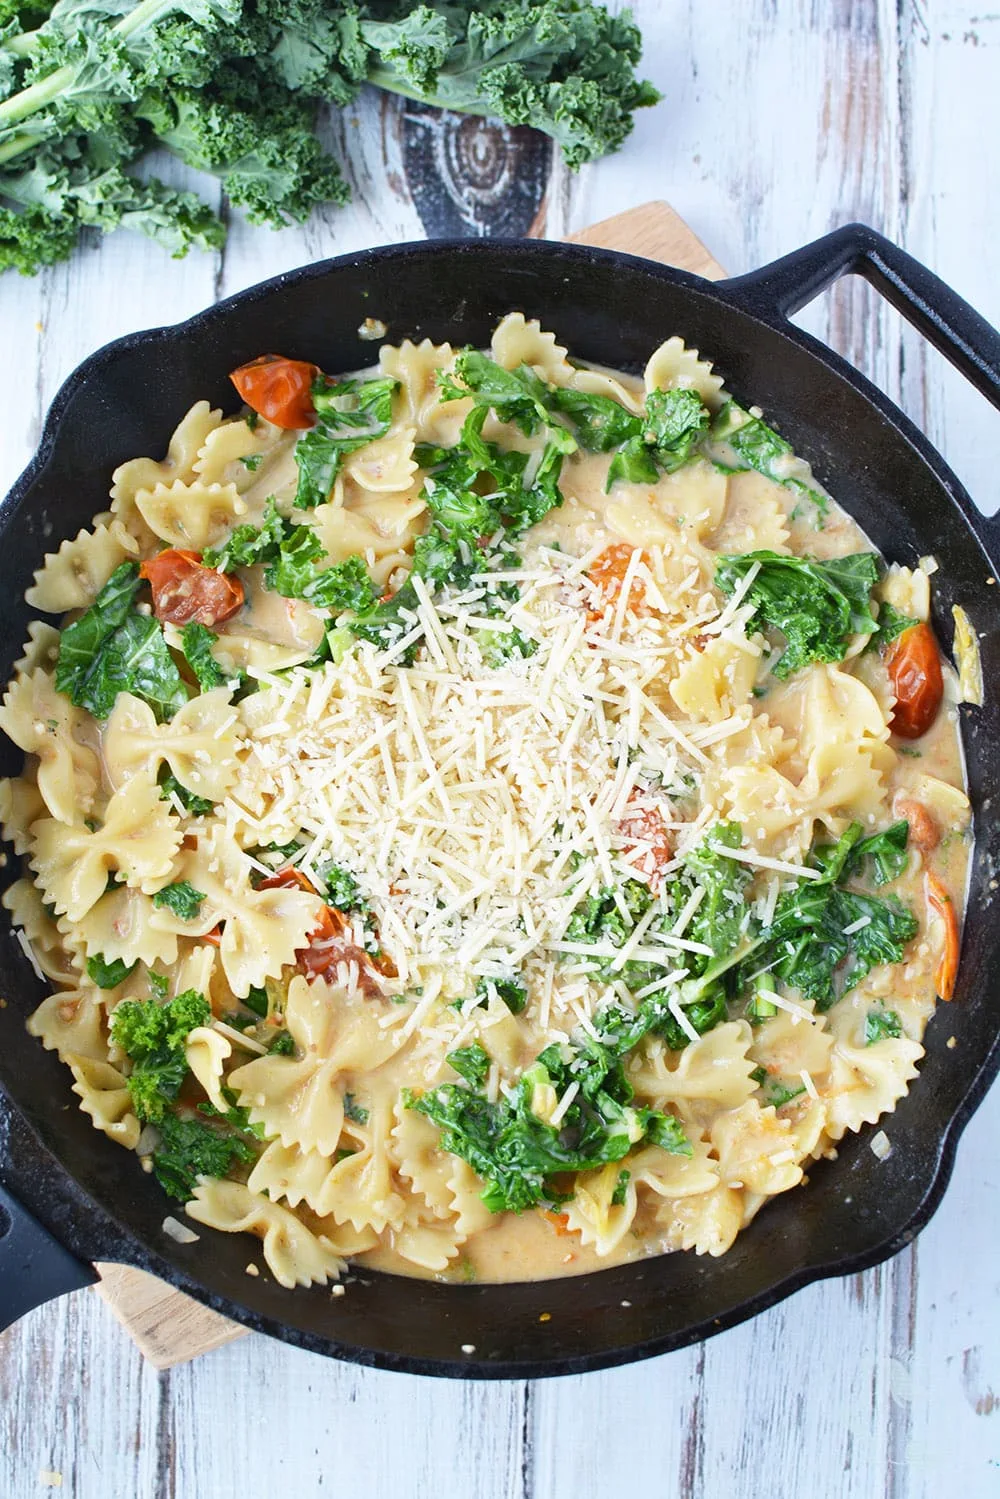 Meatless pasta recipe with kale in a skillet.